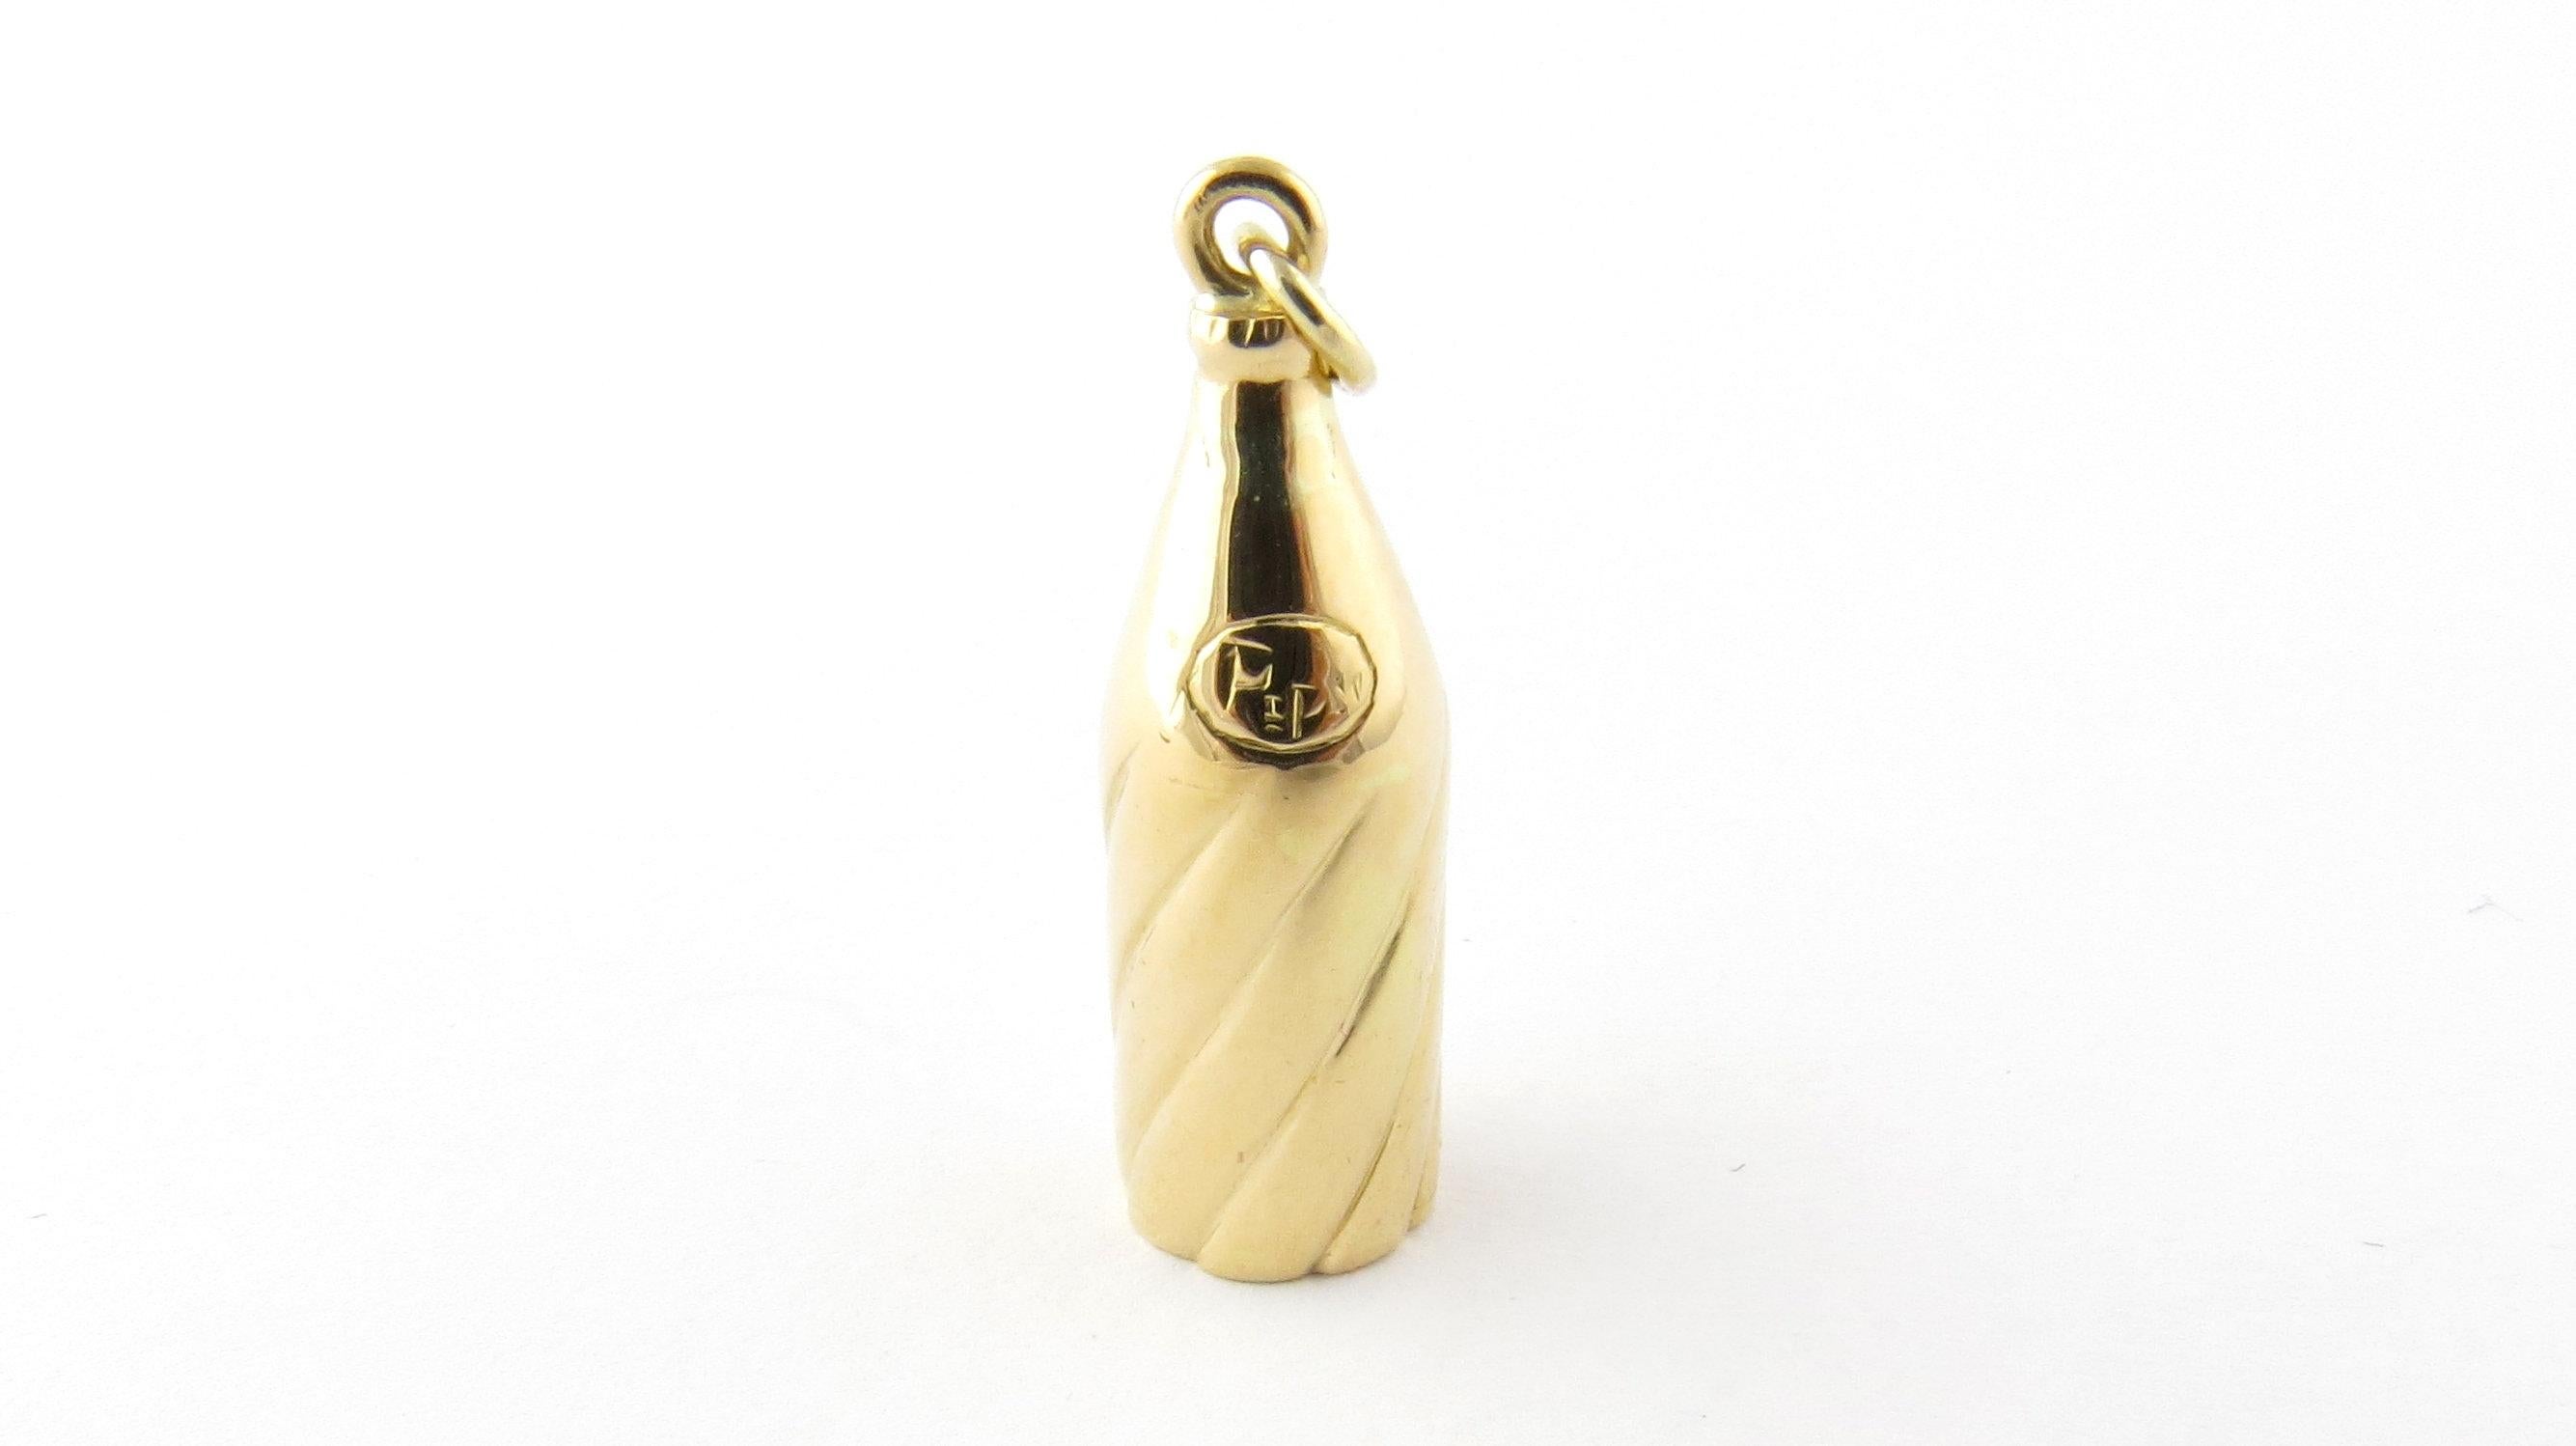 Vintage 18 Karat Yellow Gold Pepsi Bottle Charm- 
The Pepsi generation! 
This whimsical 3D charm features a miniature Pepsi bottle meticulously detailed in 18K yellow gold. 
Size: 26 mm x 8 mm (actual charm) 
Weight: 2.8 dwt. / 4.5 gr. 
Hallmark: